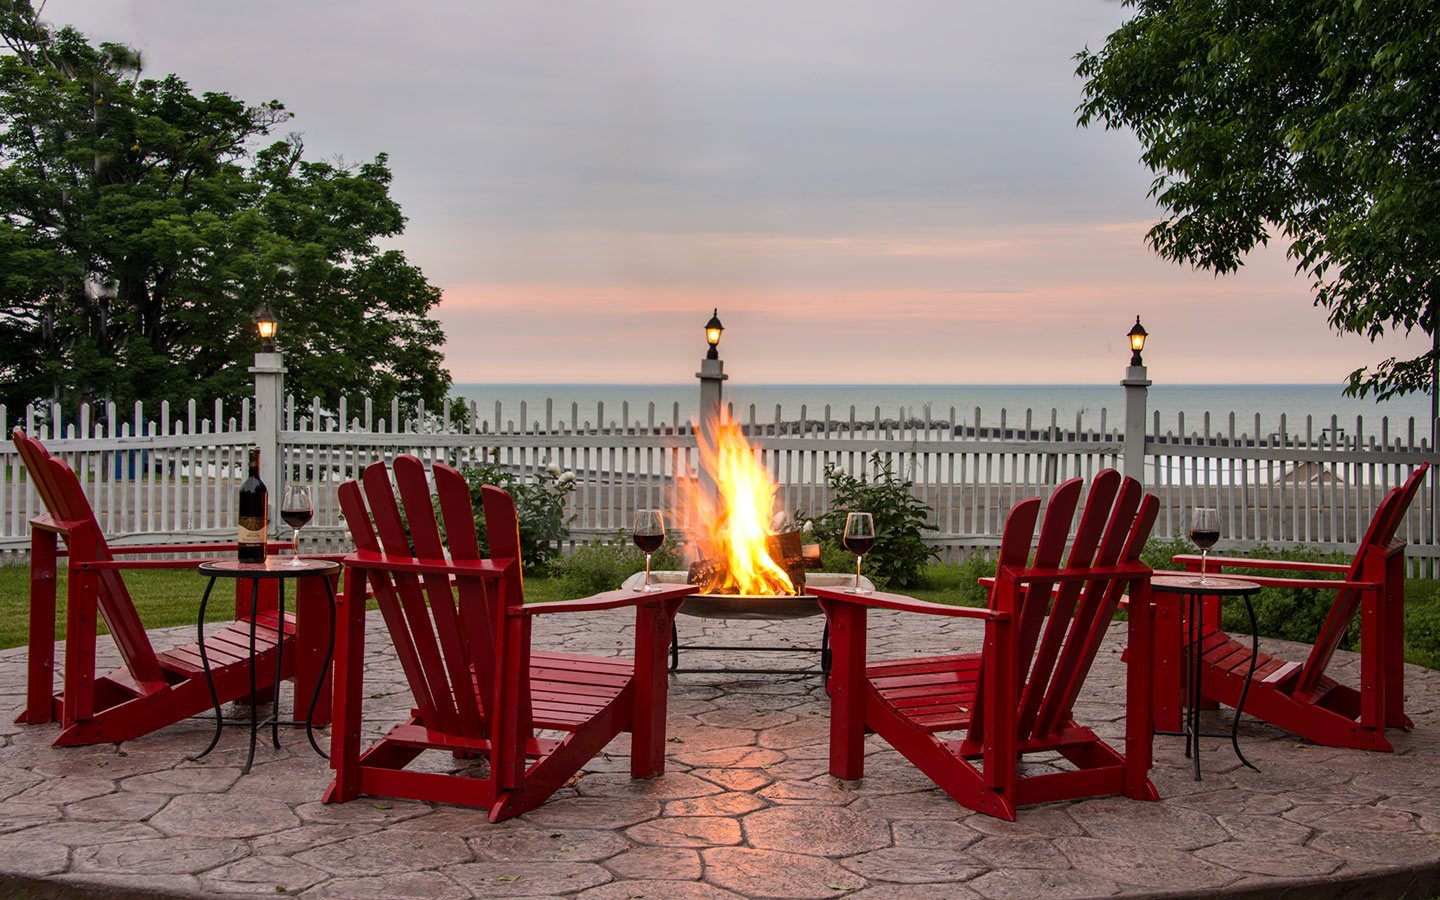 Lake Erie Bed and Breakfast